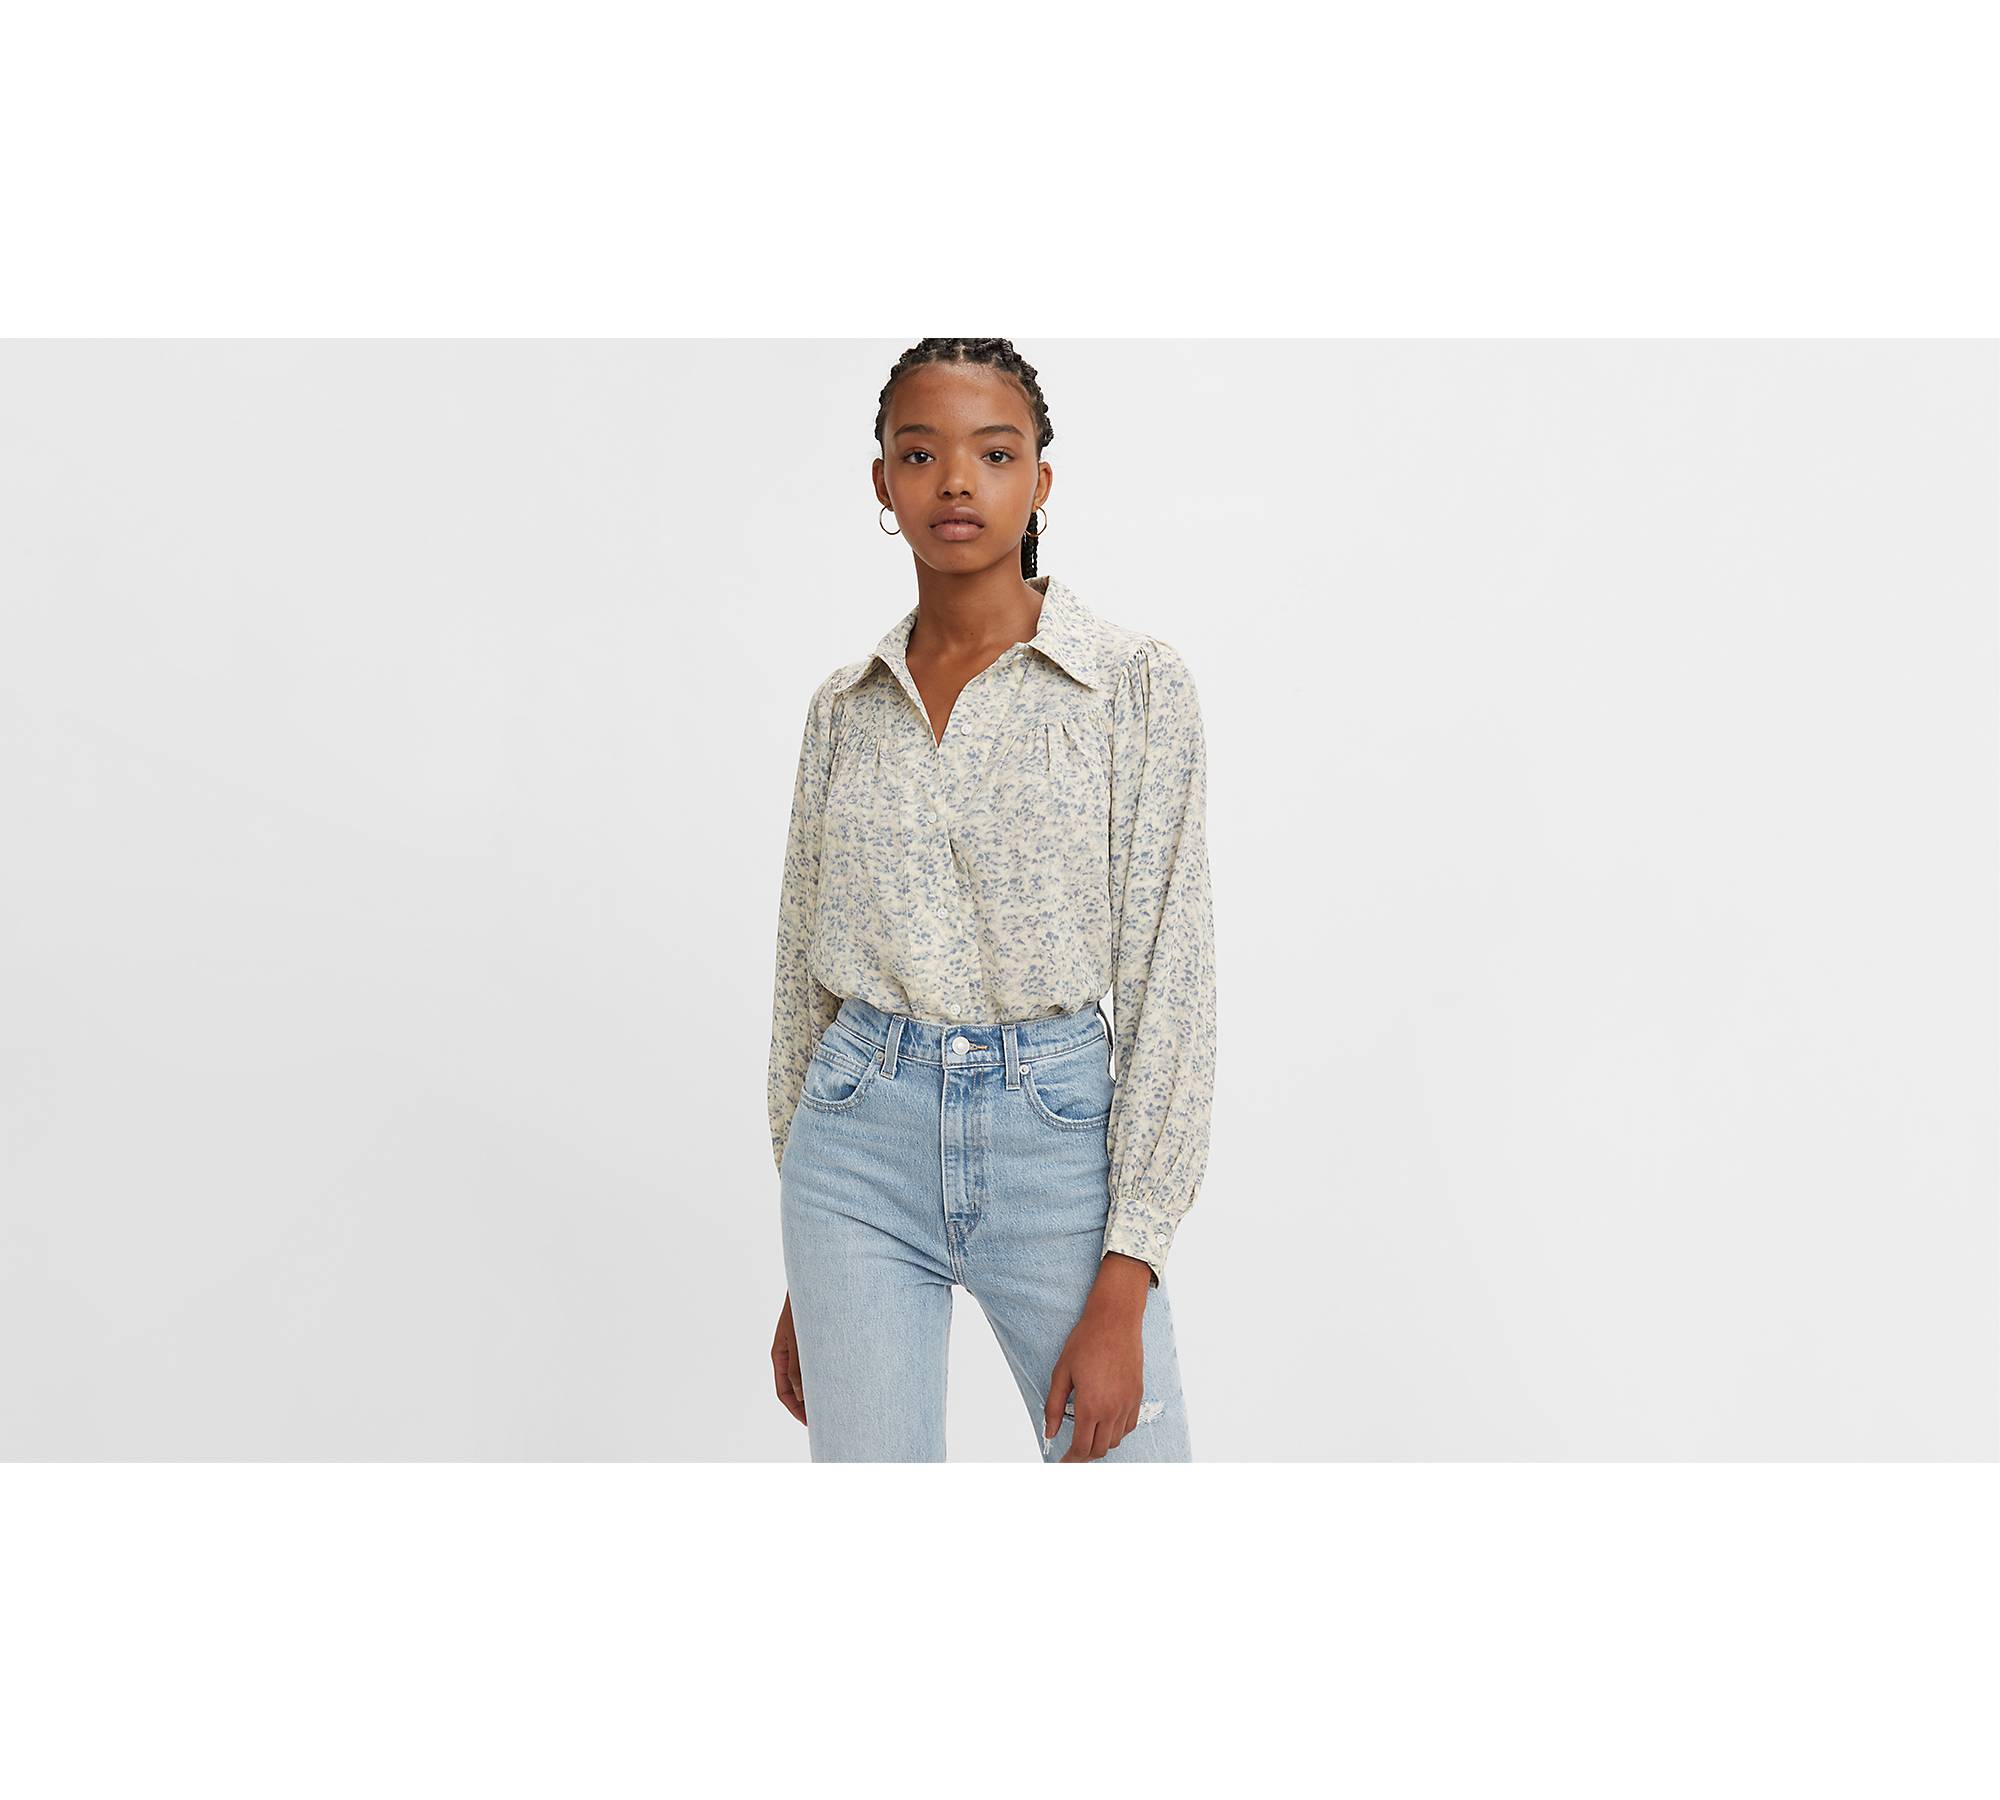 Levi's Floral Blouse Is 63% Off at Walmart in 2 Colors